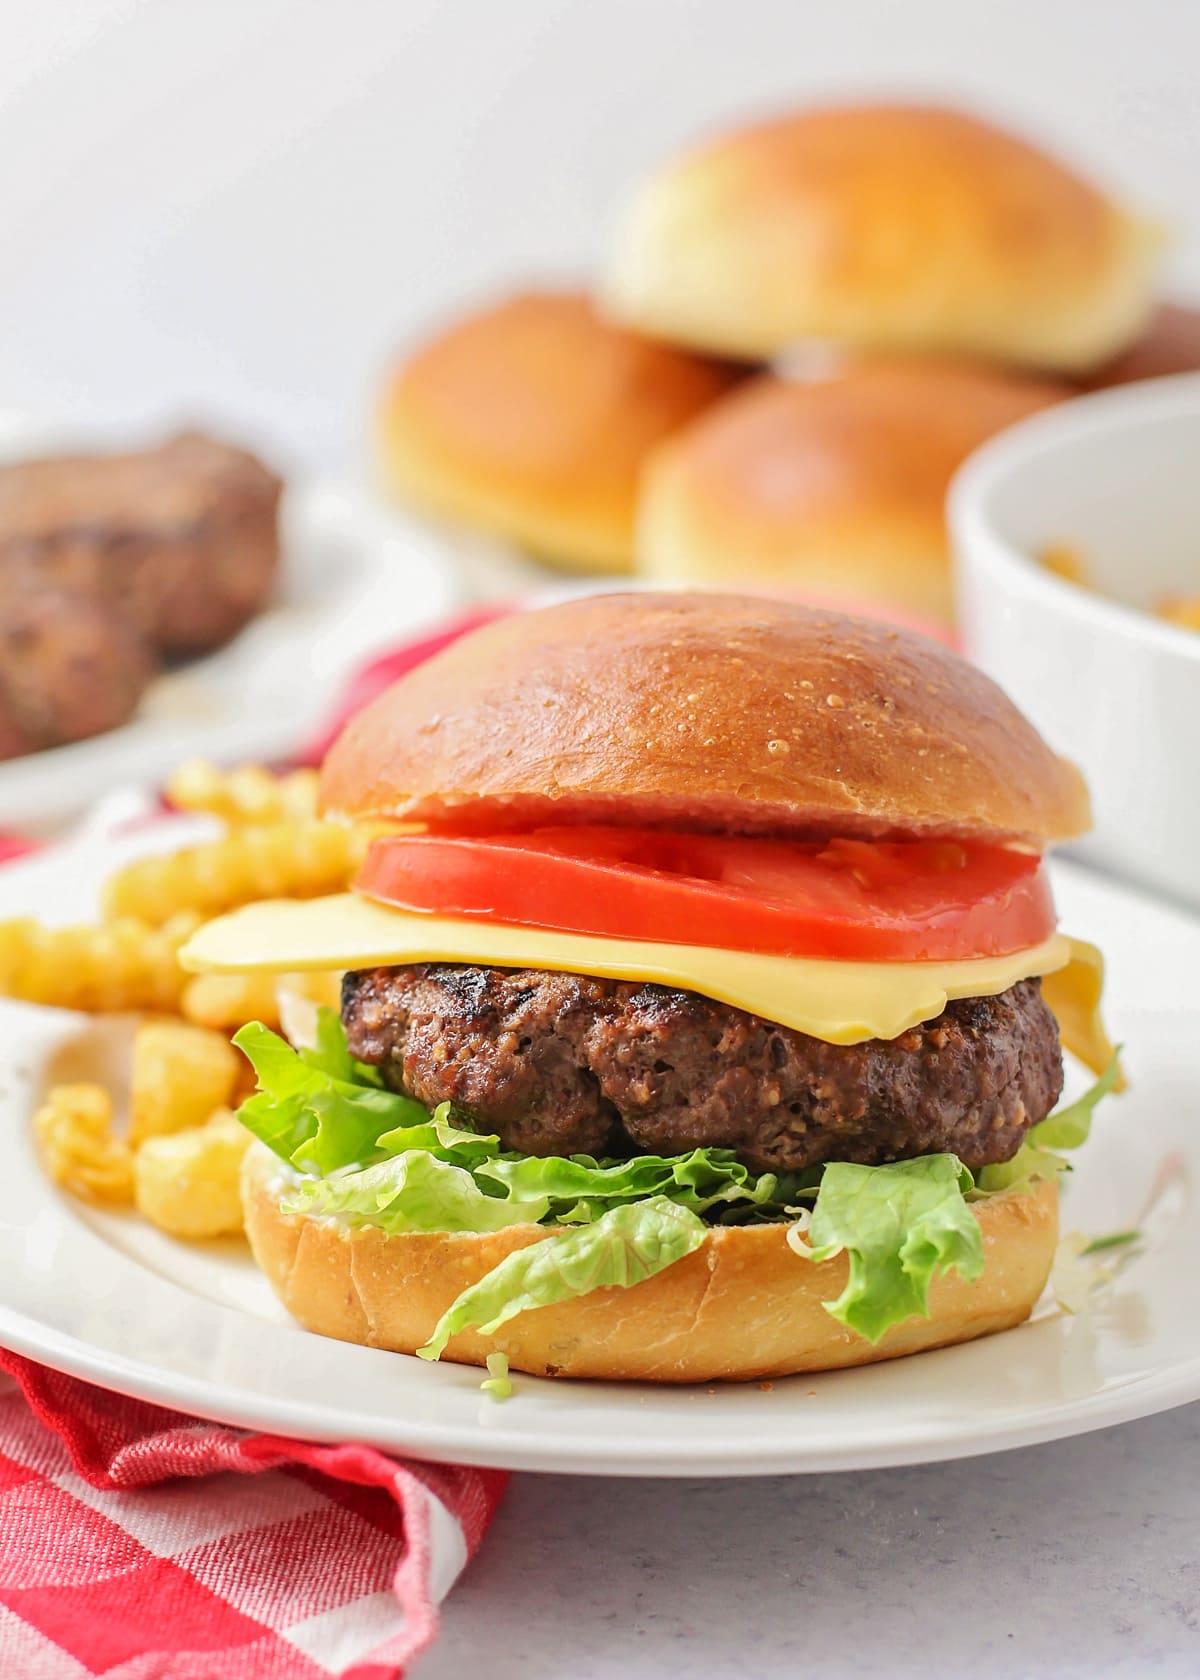 Hamburger recipe served on a bun with lettuce, tomato, and cheese.